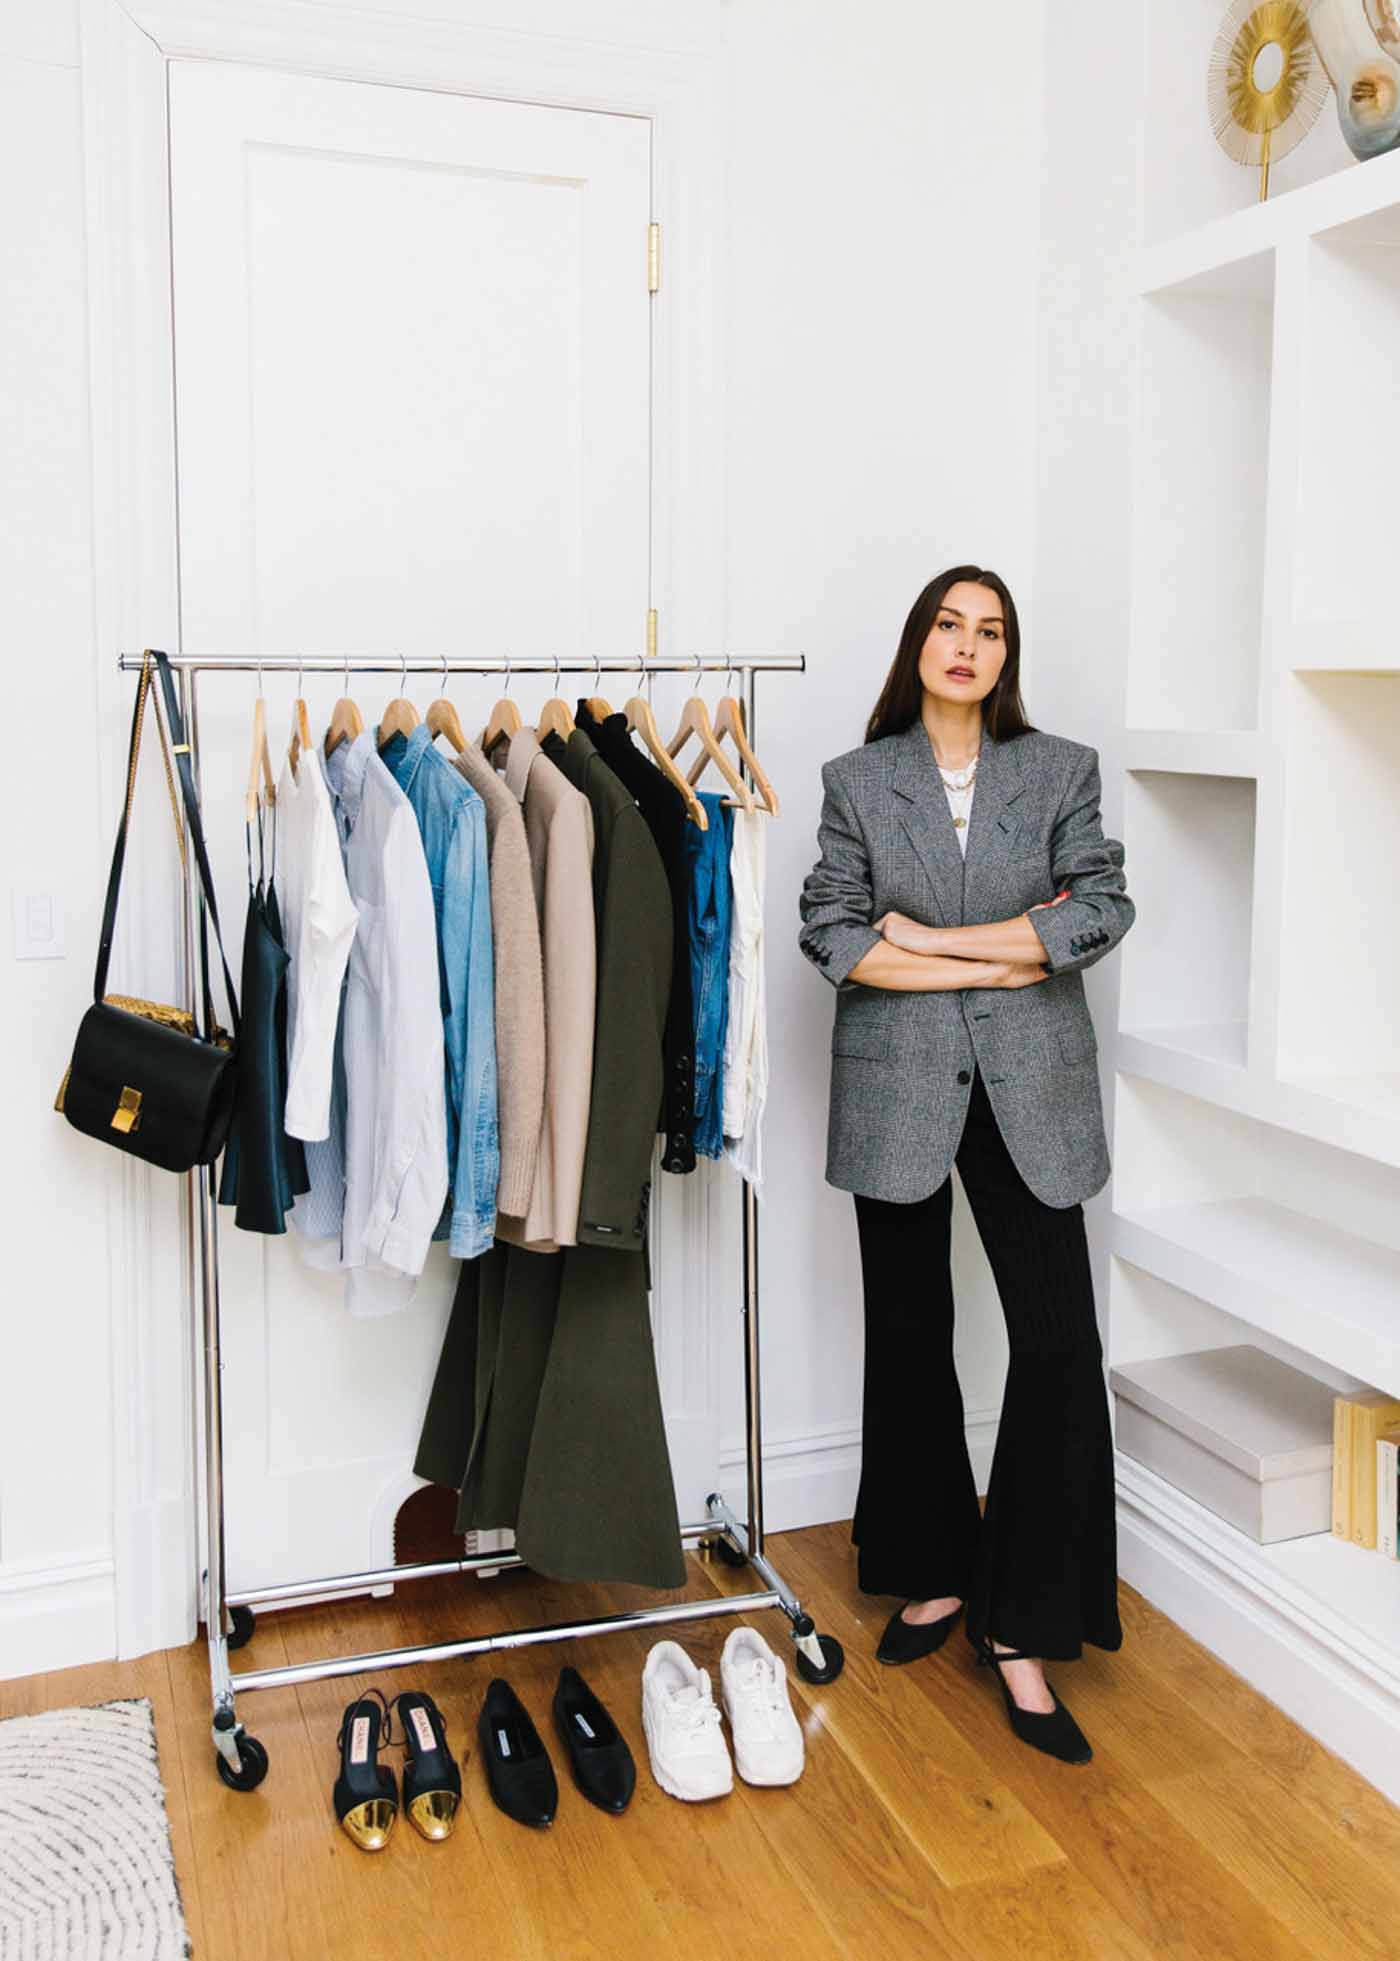 22 Stylist Allison Bornstein Wants You To Shop Your Closet. Photography By Jennifer Trahan